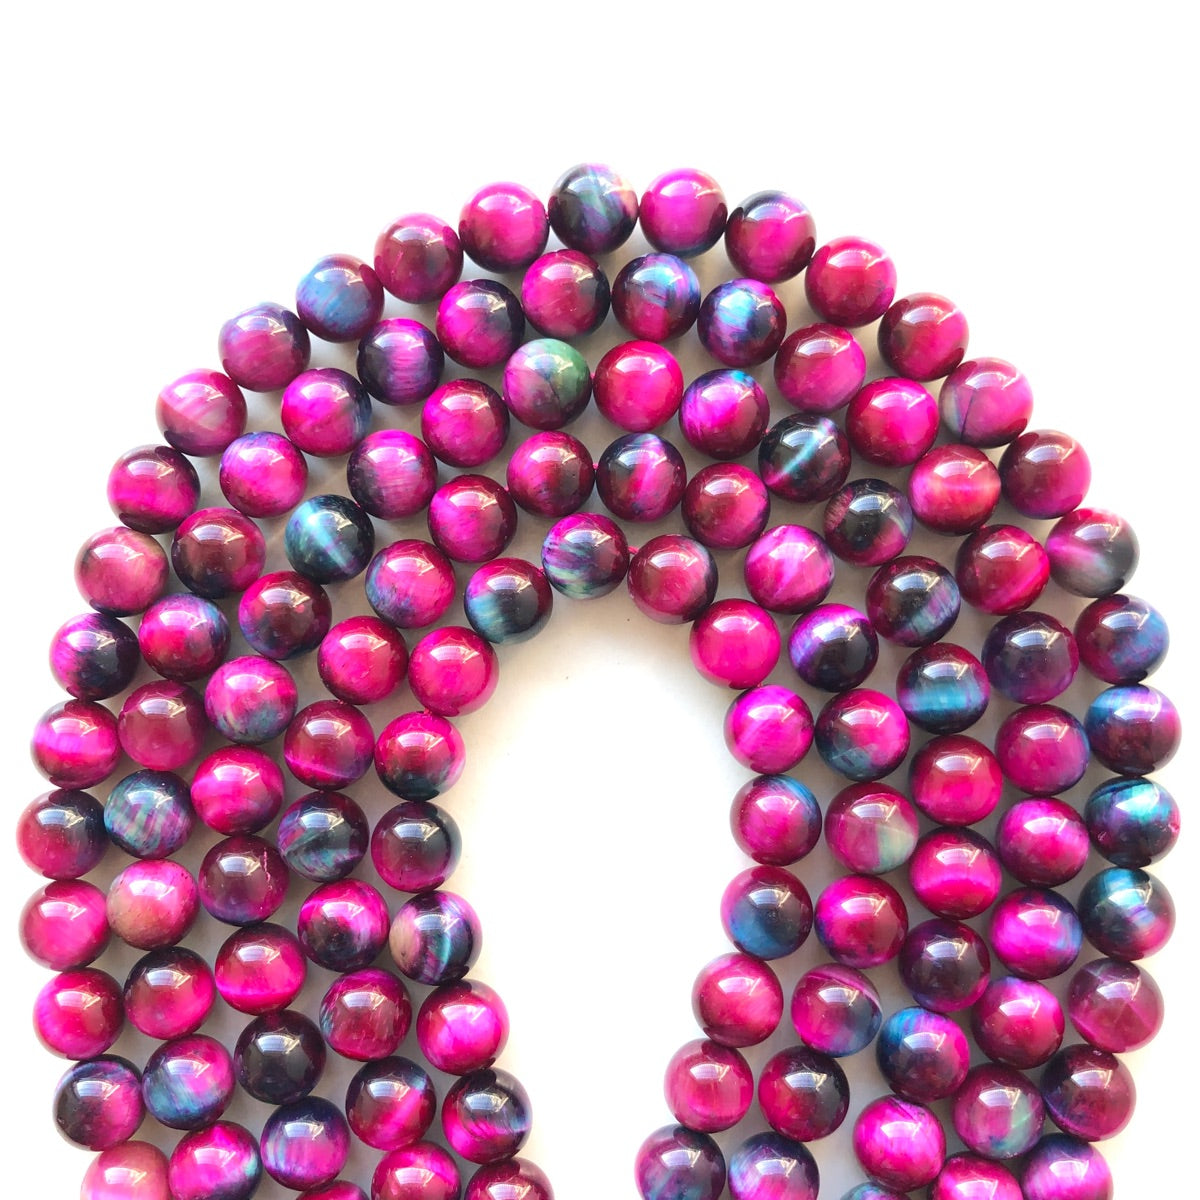 10mm Natural Hot Pink Blue Galaxy Tiger Eye Round Stone Beads Stone Beads New Beads Arrivals Tiger Eye Beads Charms Beads Beyond